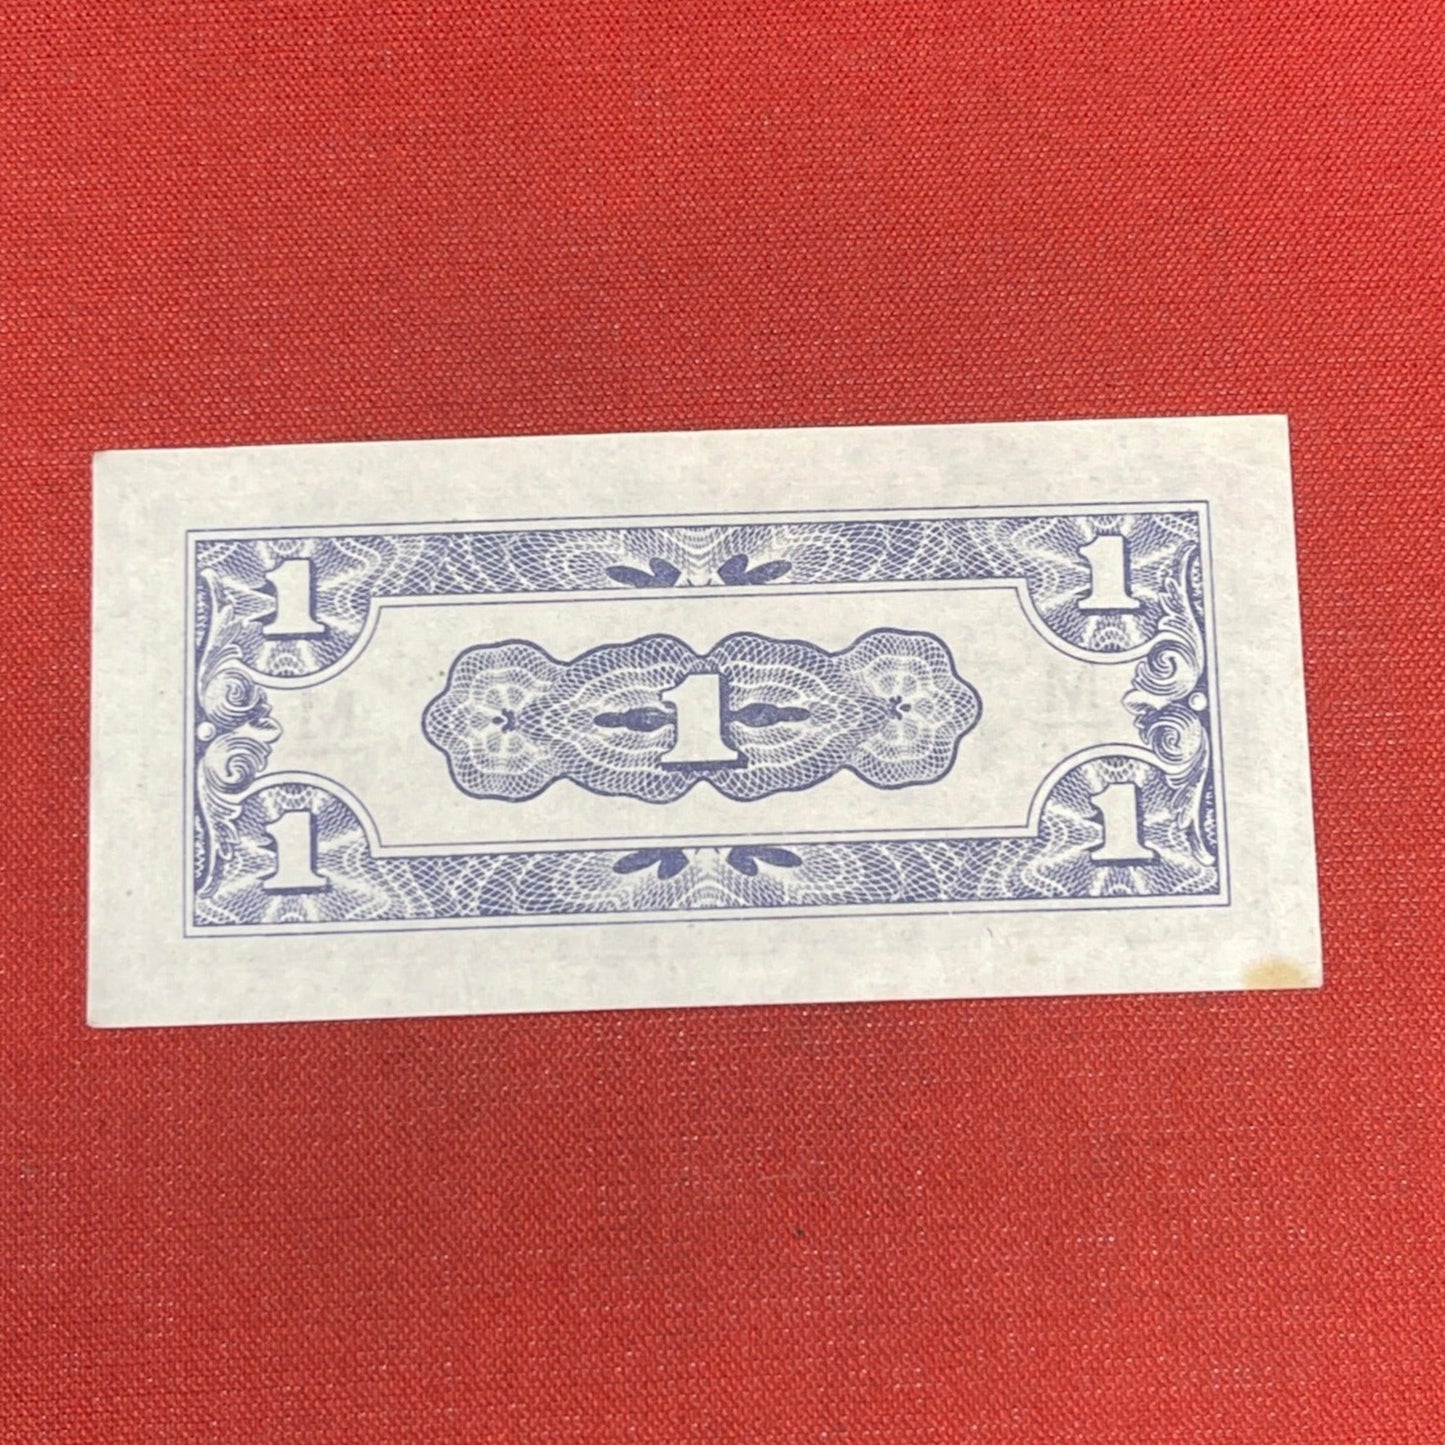 The Japanese Government 1 Cents Banknote